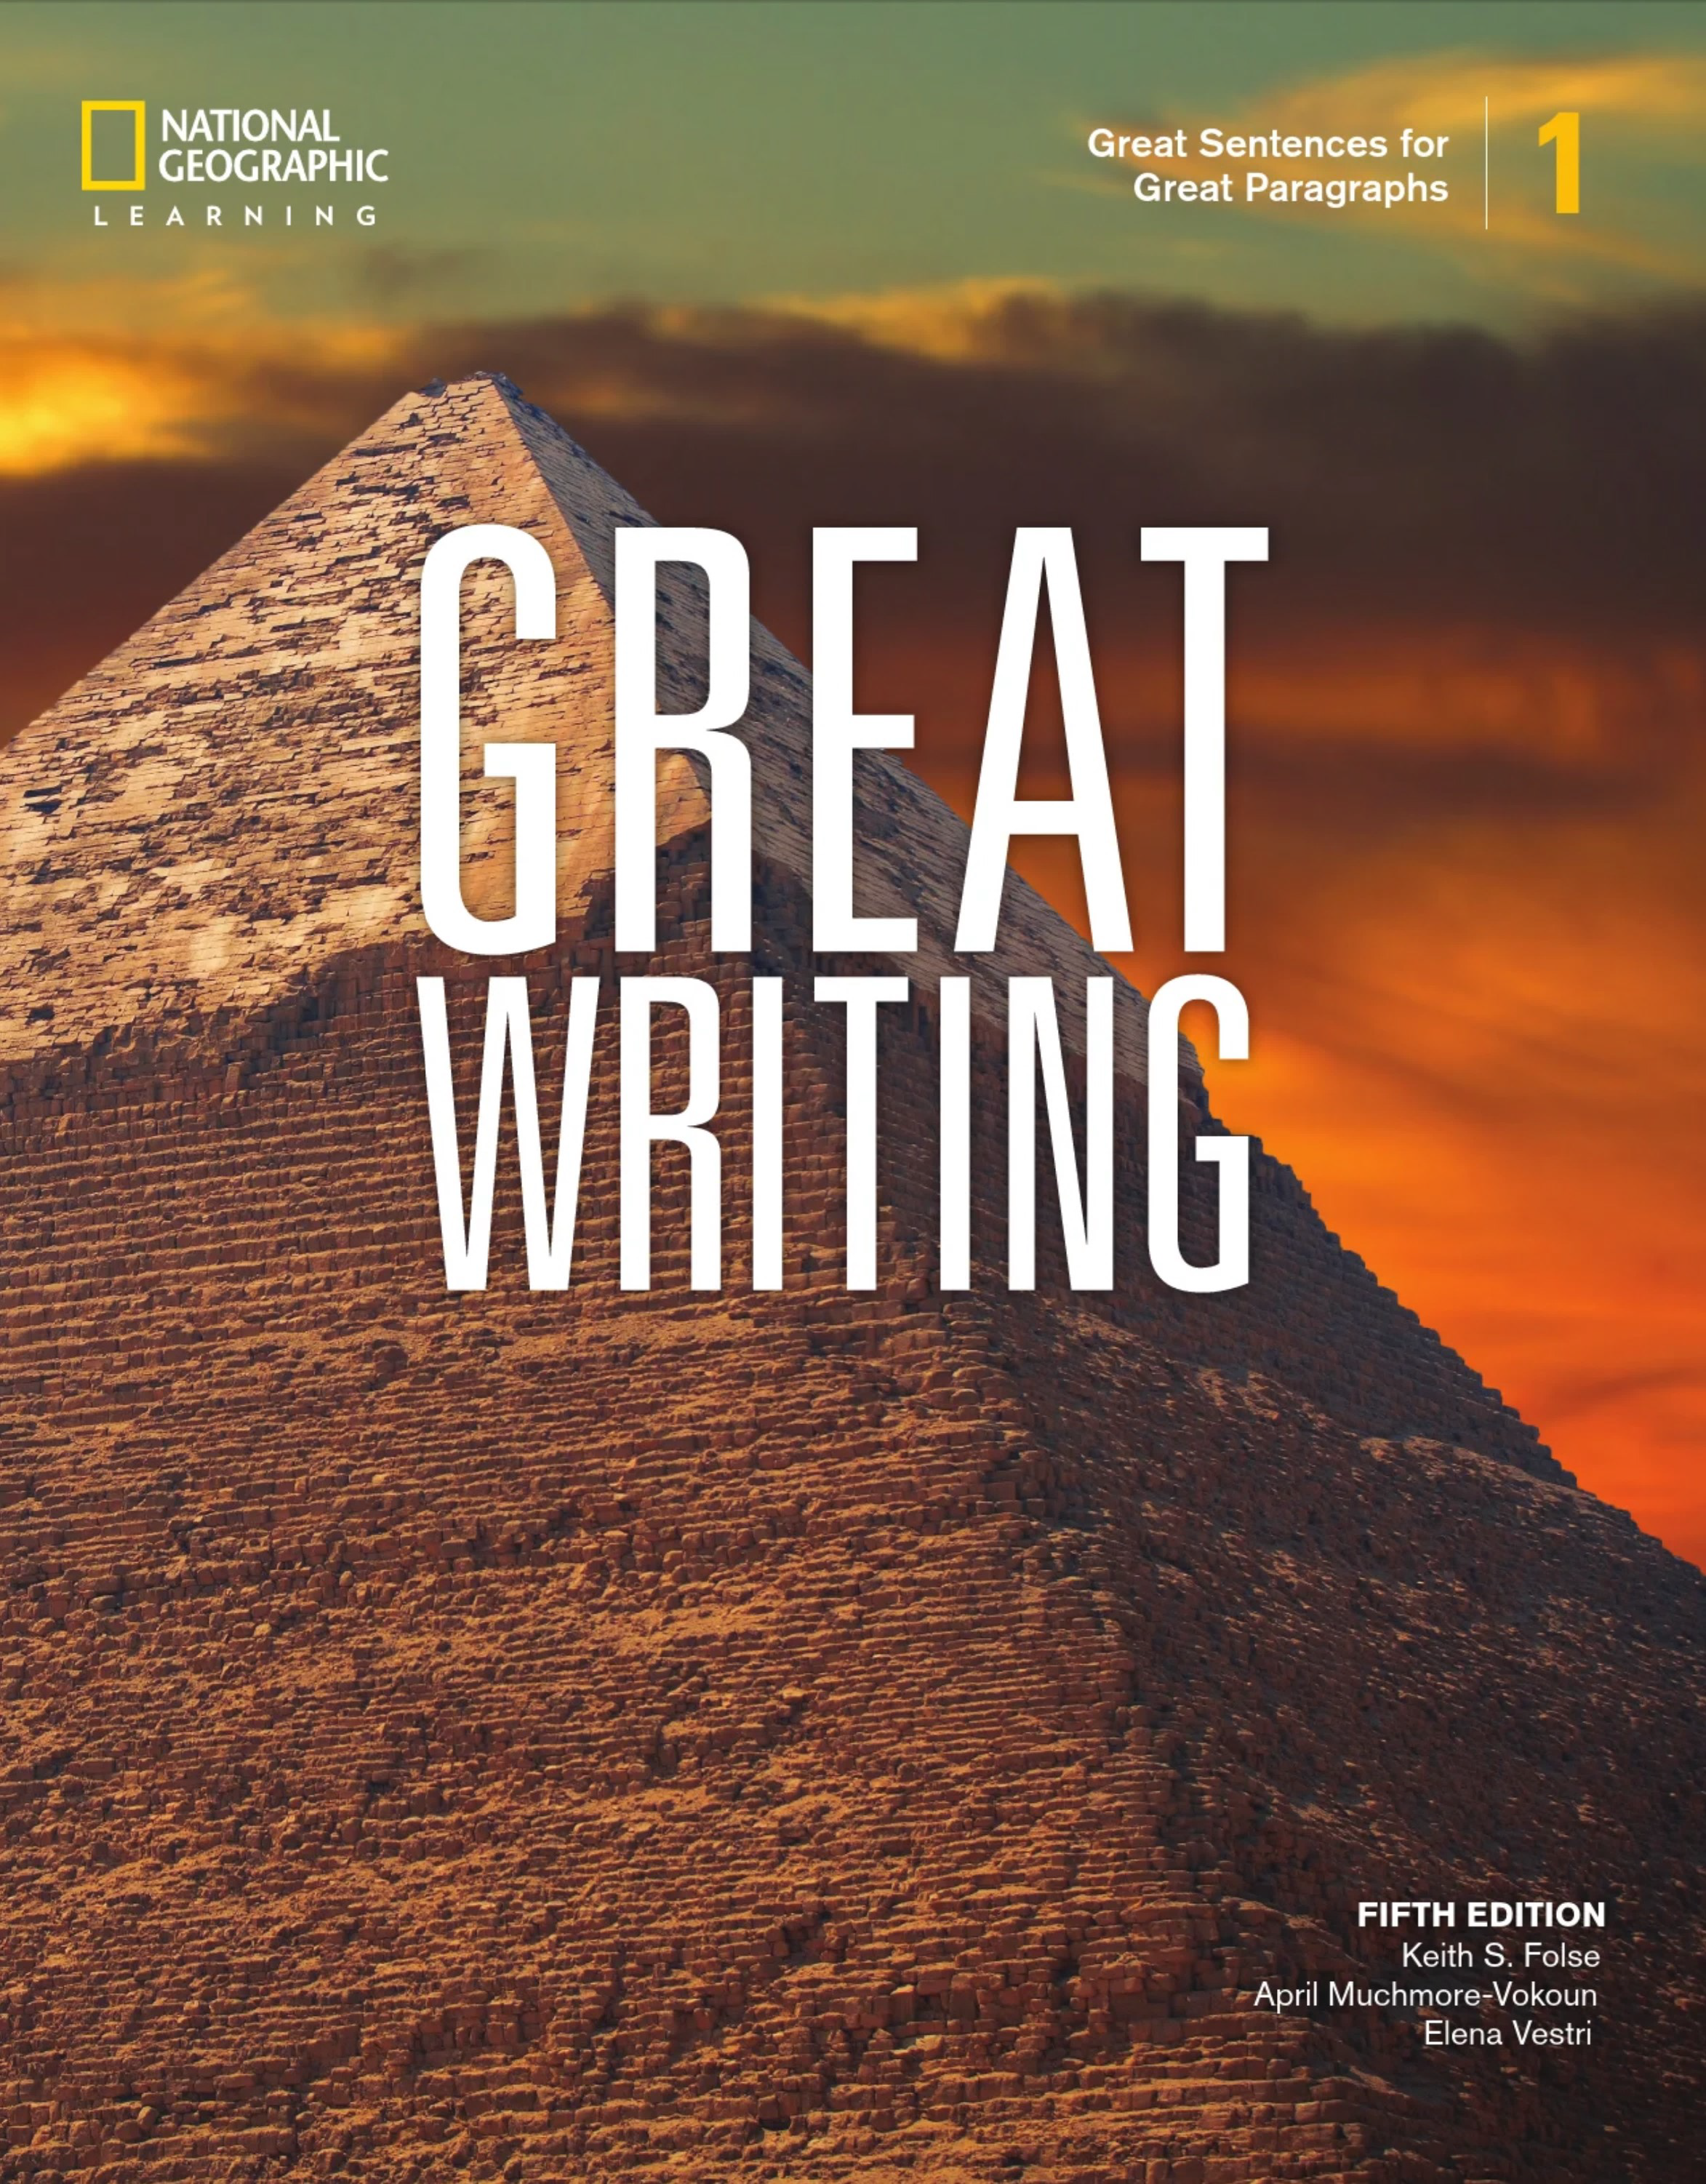 Great writing 5. Great writing book. Great sentences. Great essays book great writing Kieth Folse. Great essays book great writing pdf.